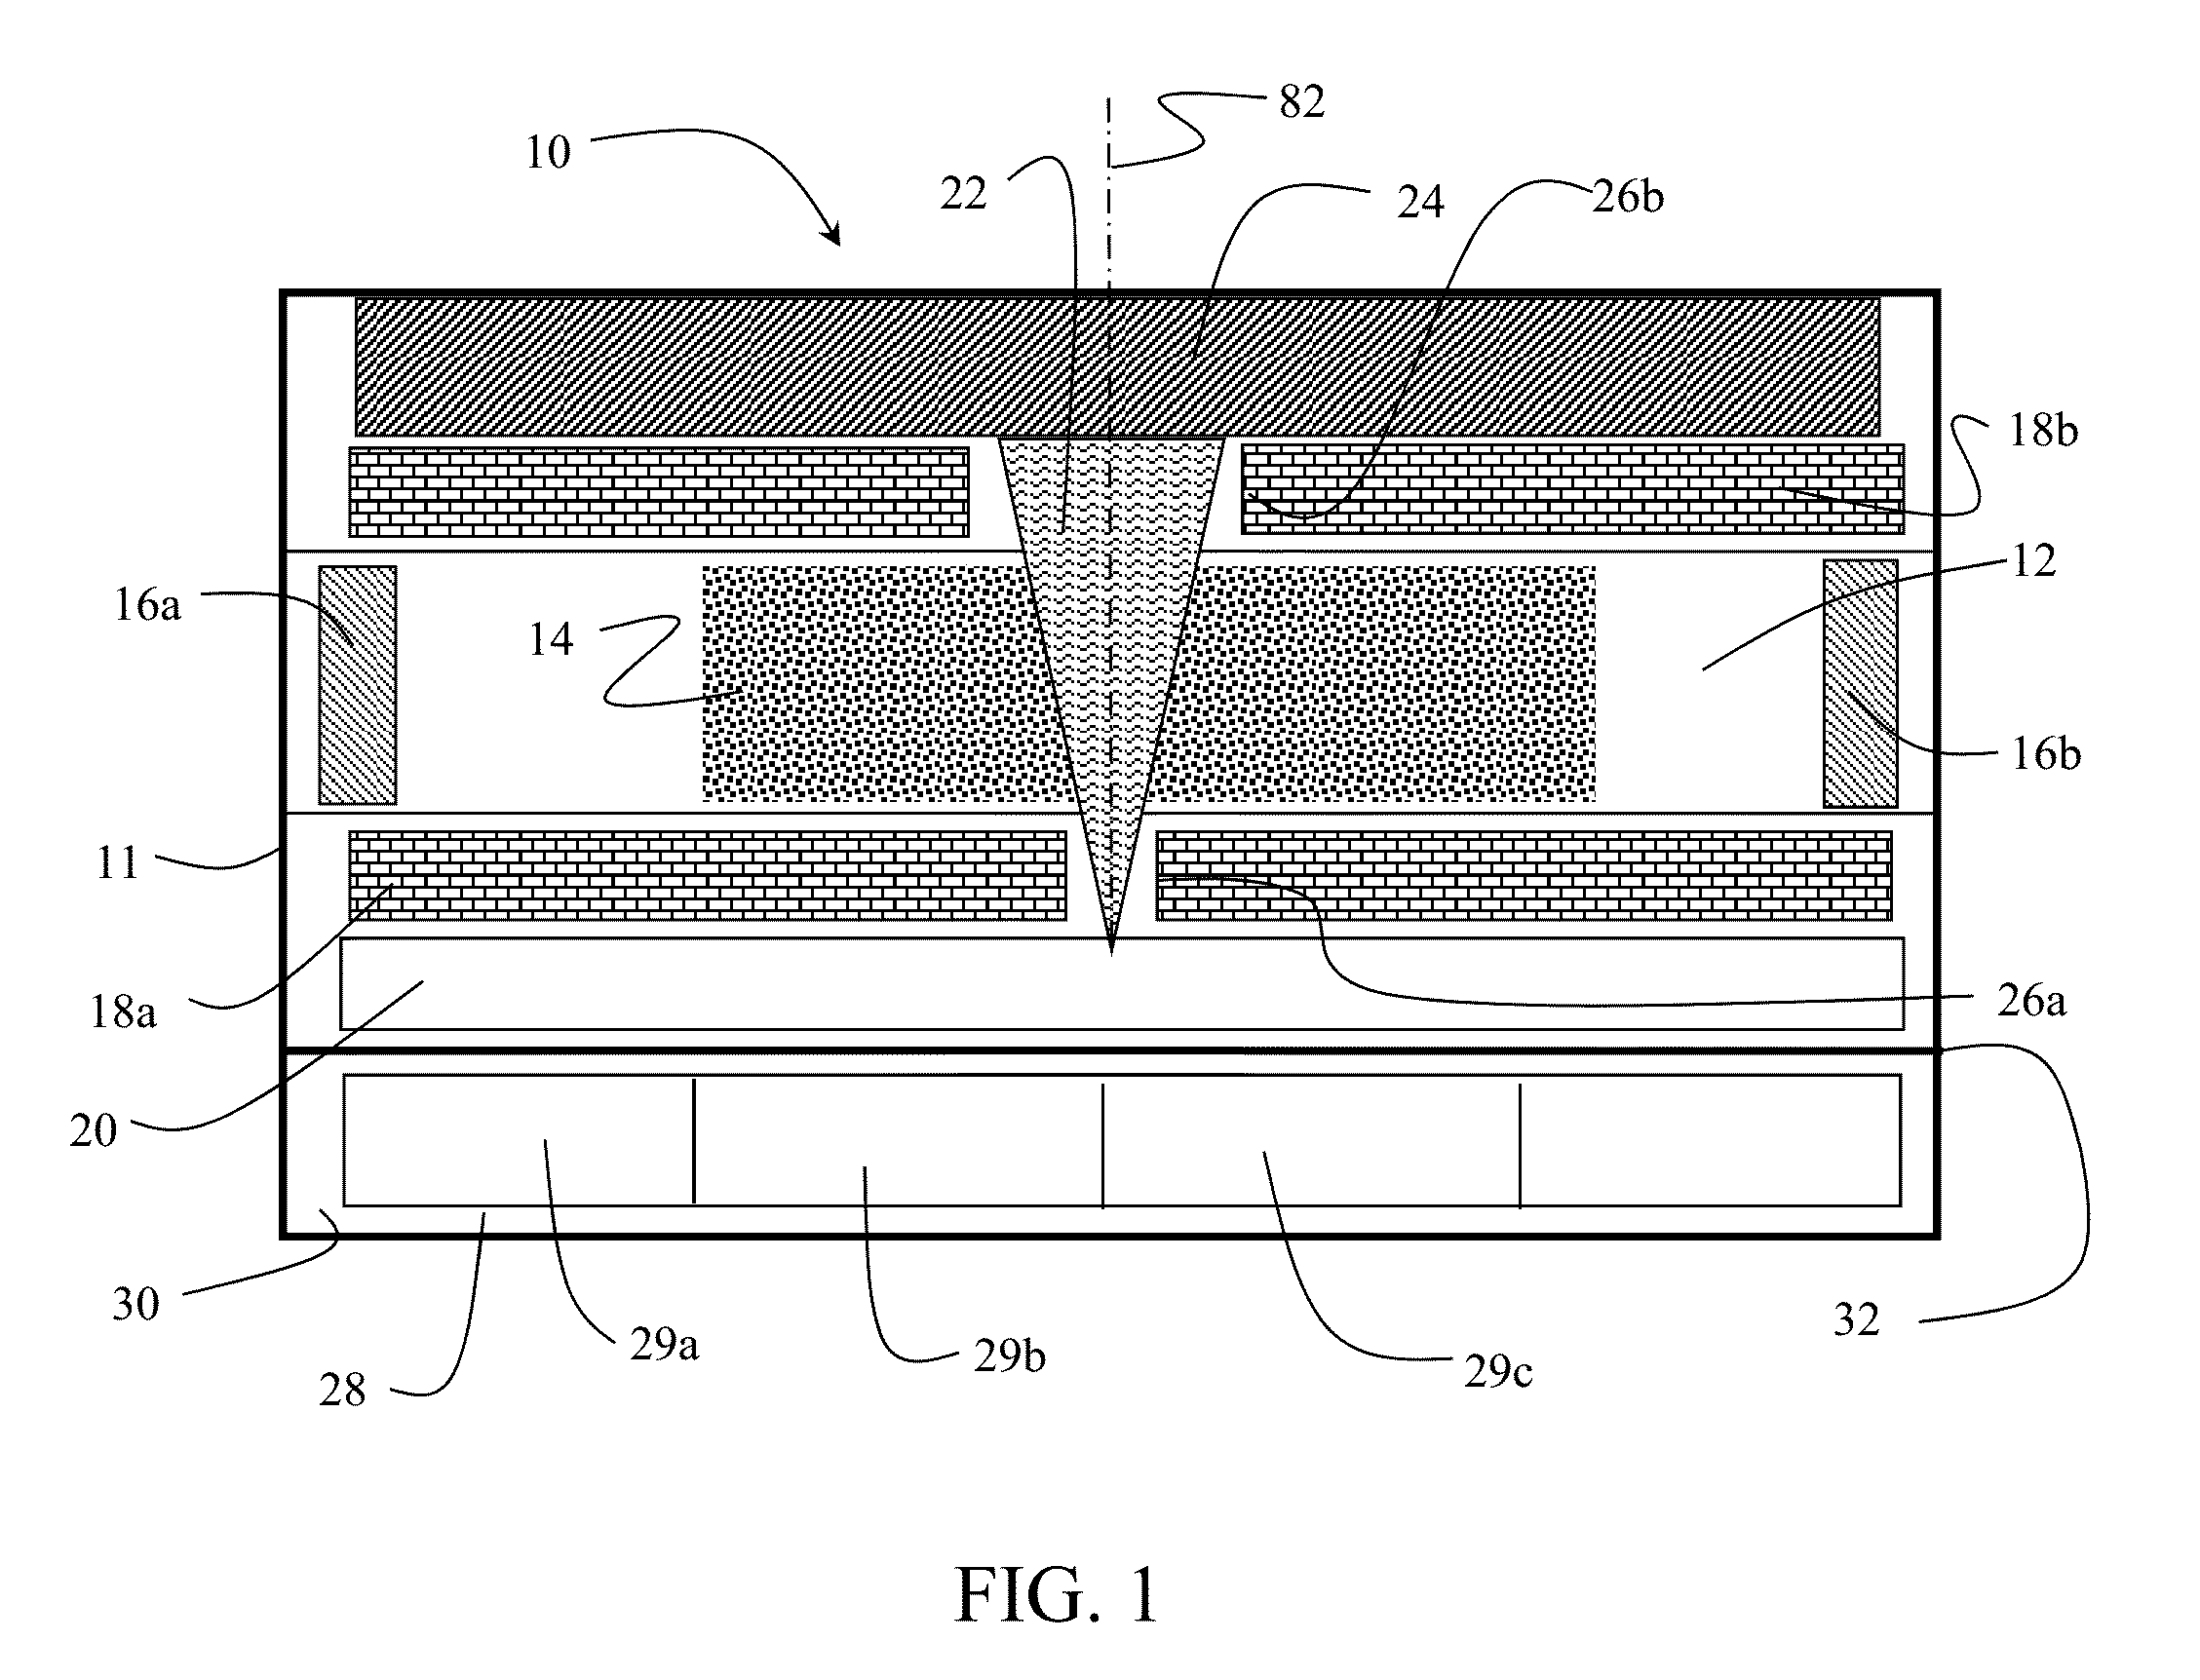 Micro atomic and inertial measurement unit on a chip system